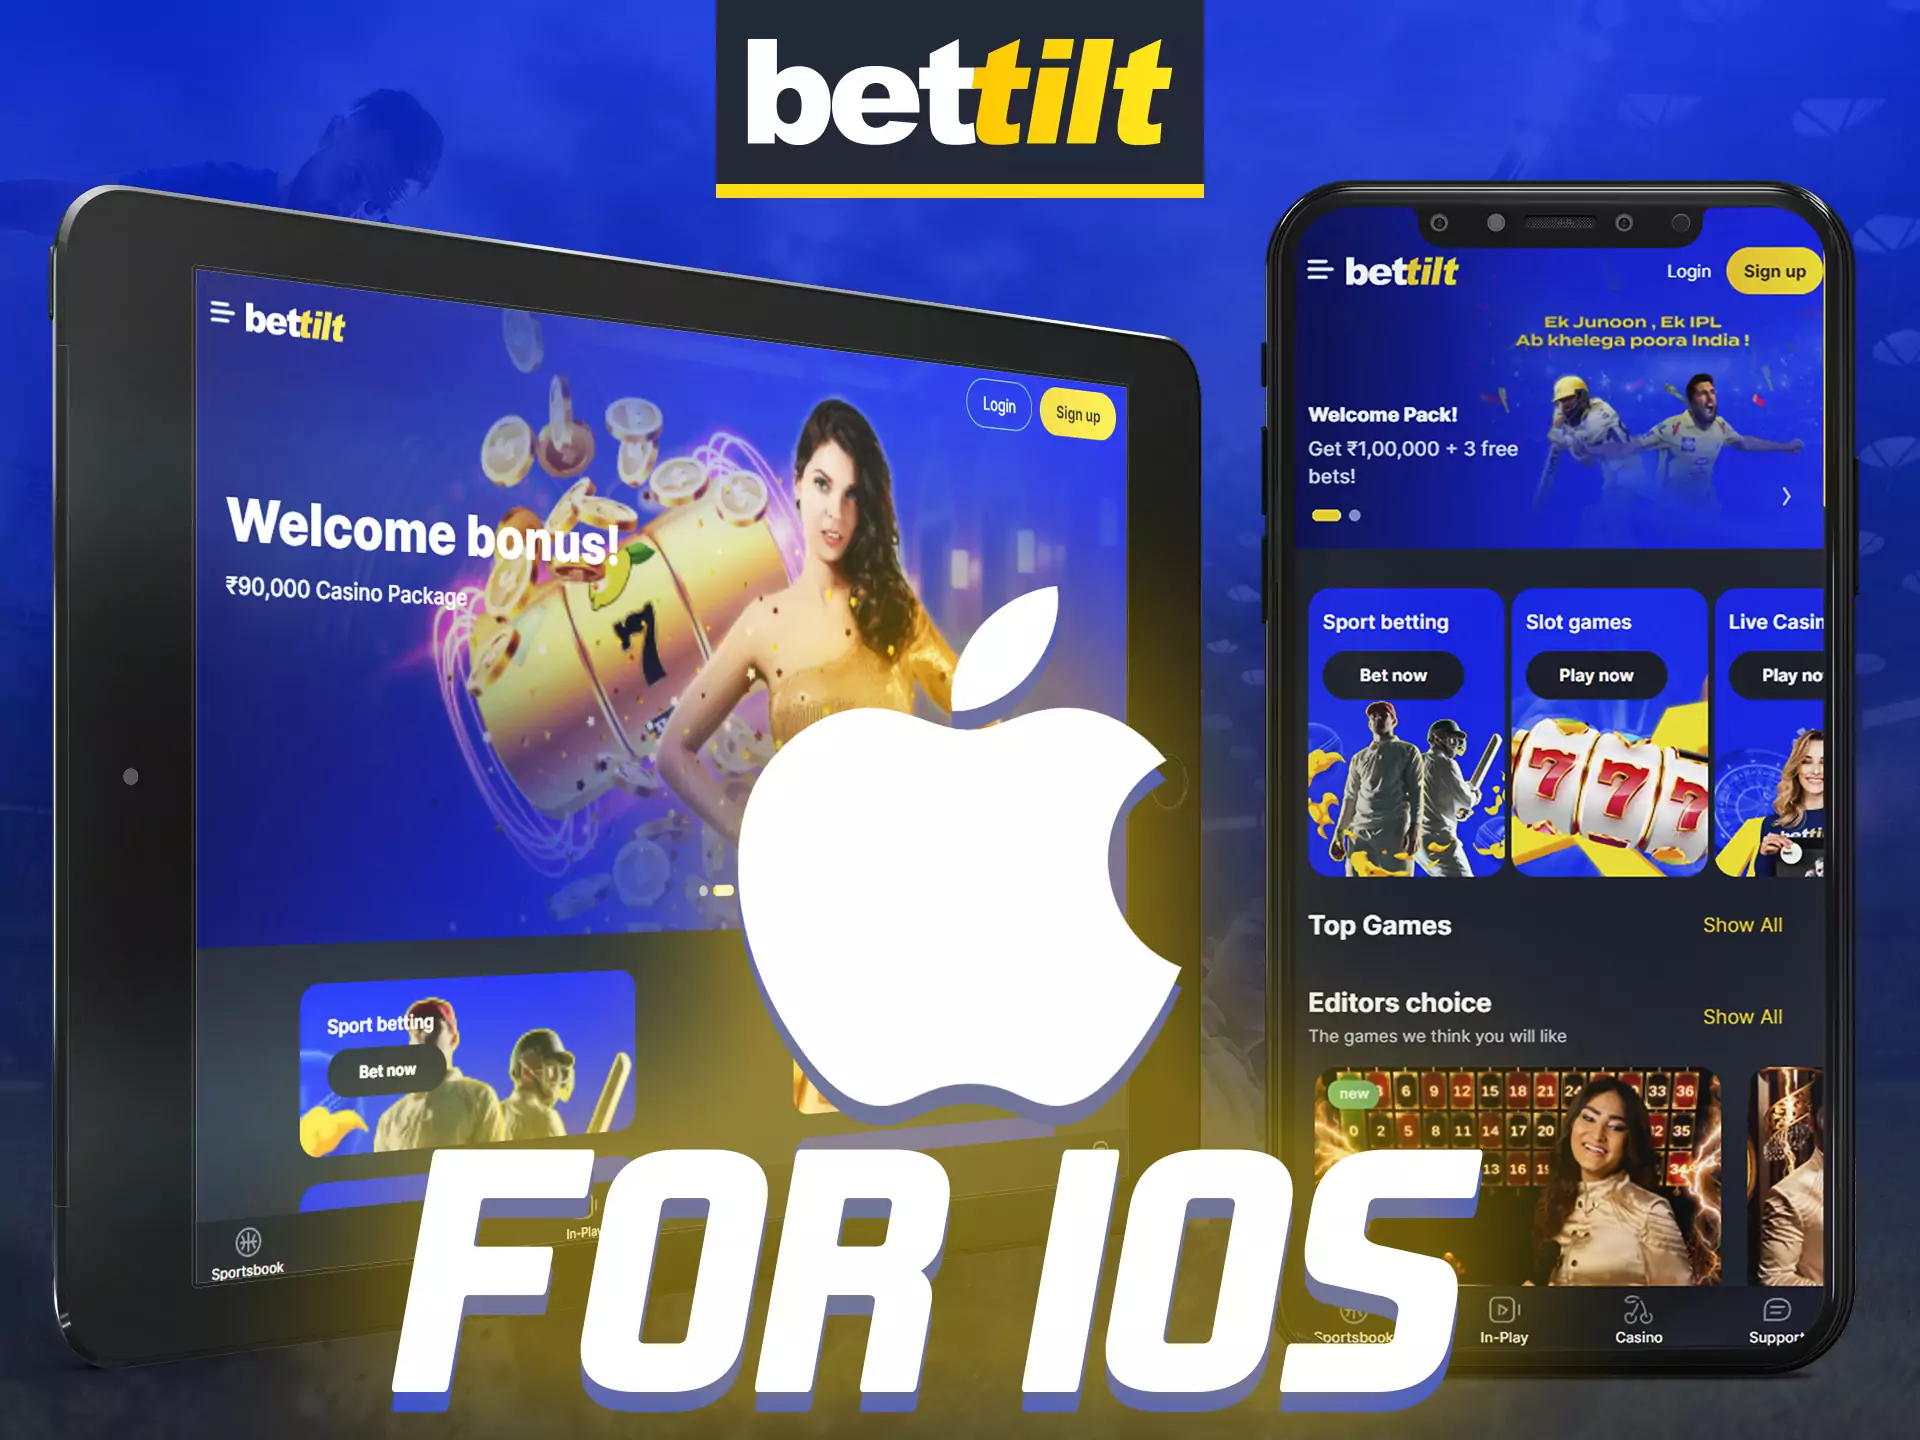 The Bettilt app can be installed on your iOS device.